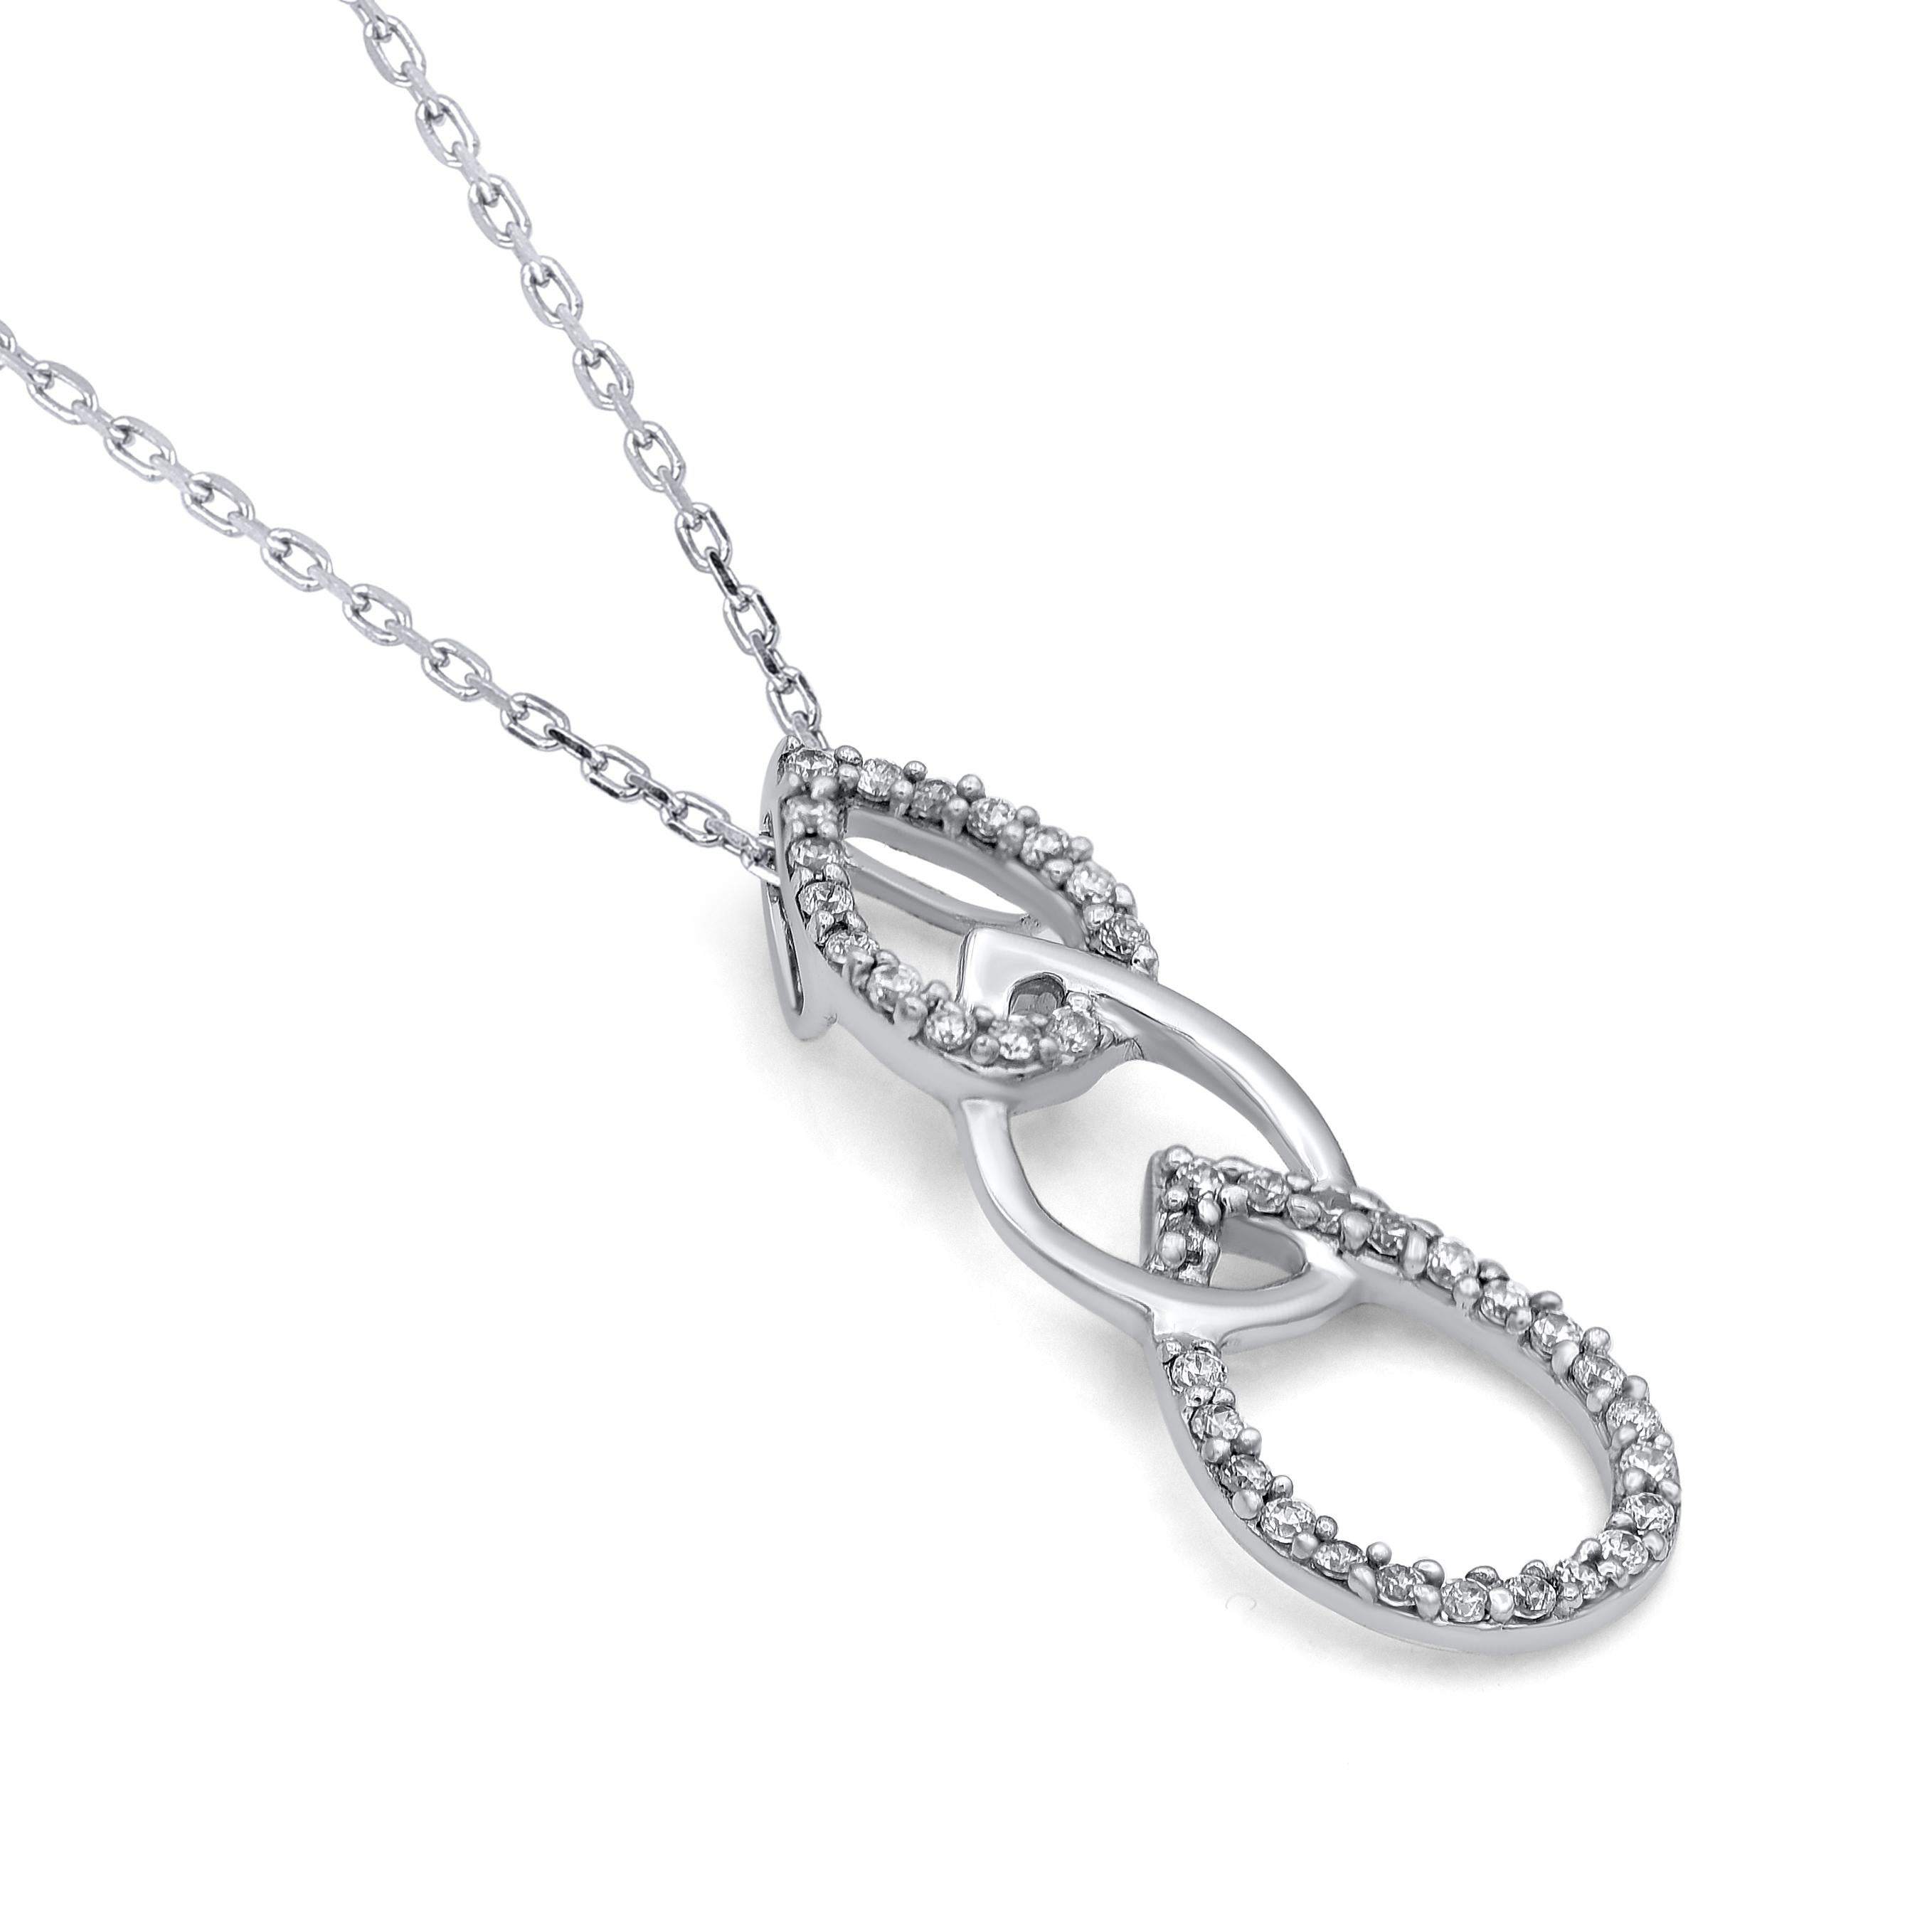 Bring charm to your look with this diamond pendant. The pendant is crafted from 14-karat white gold and features round single cut 37 white diamonds in prong set, H-I color I2 clarity and a high polish finish complete the brilliant sophistication of